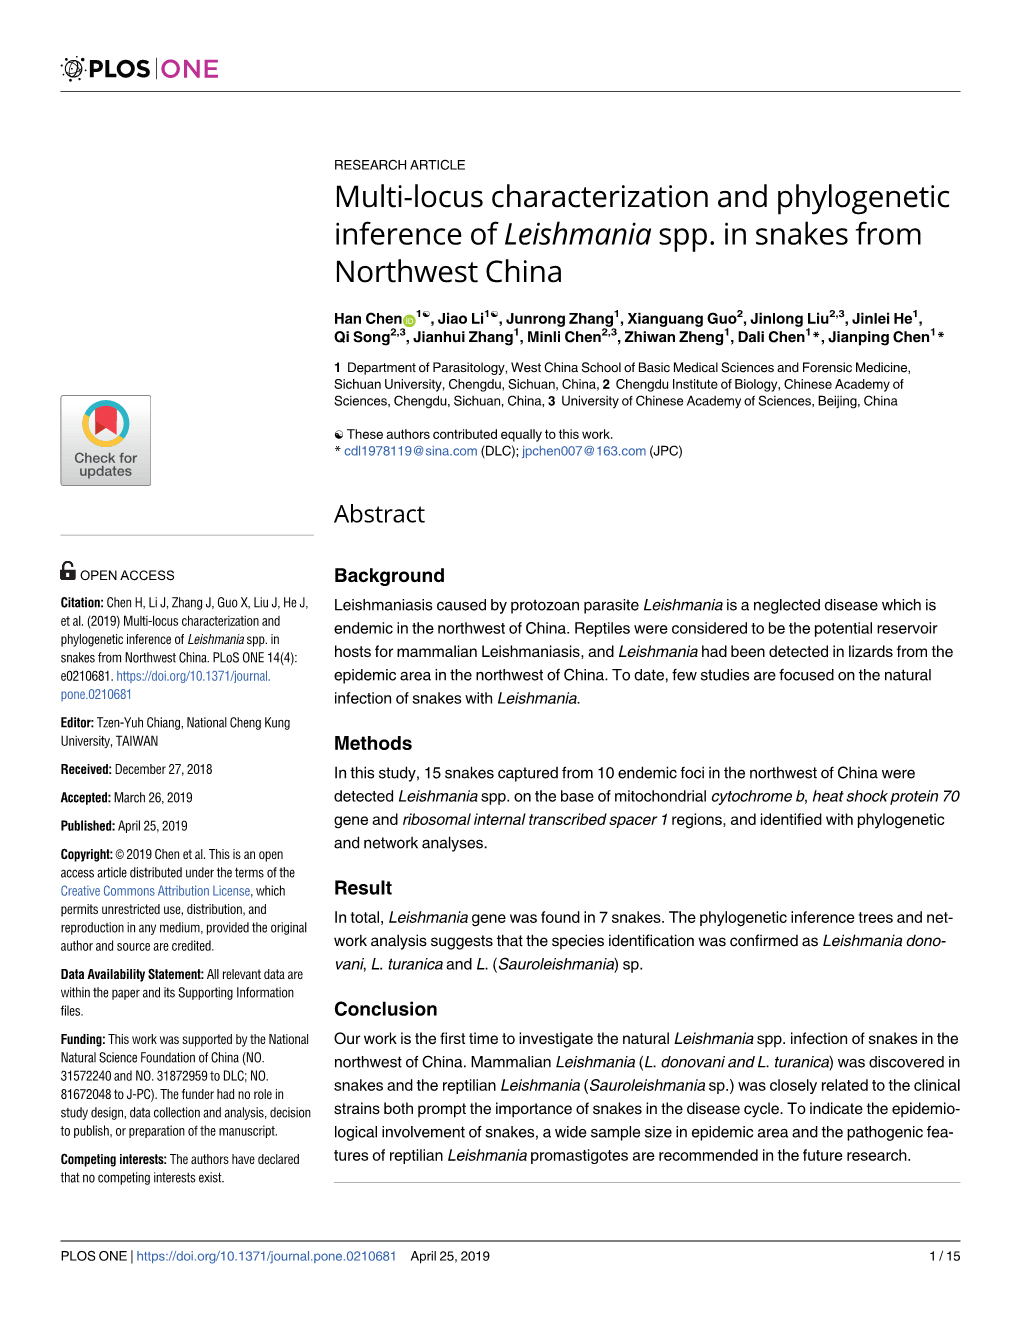 Multi-Locus Characterization and Phylogenetic Inference of Leishmania Spp